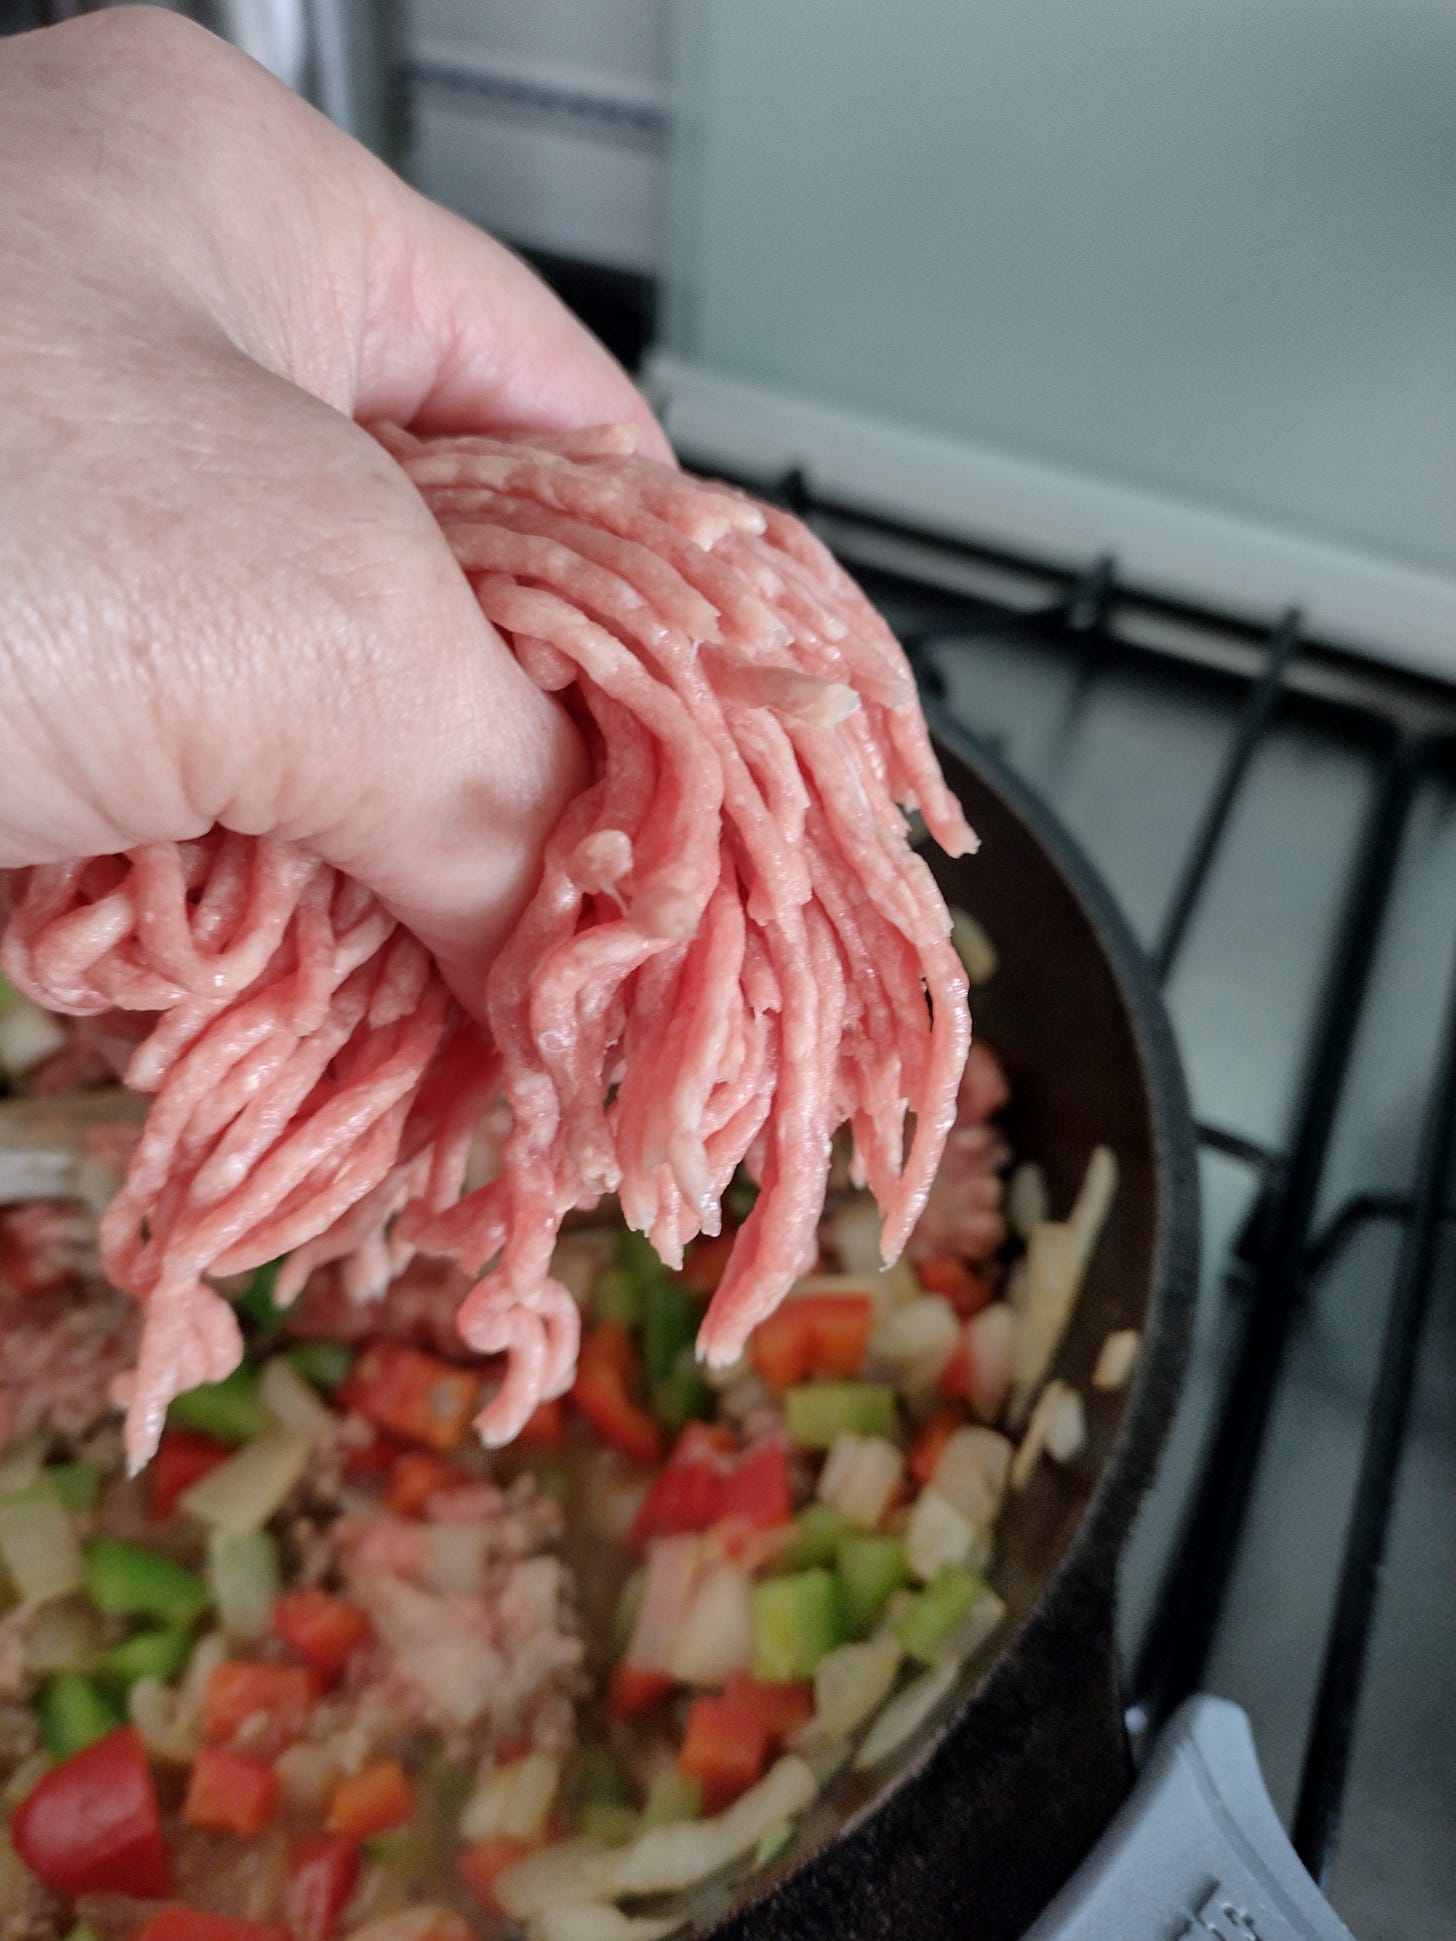 Hand holding some ground beef